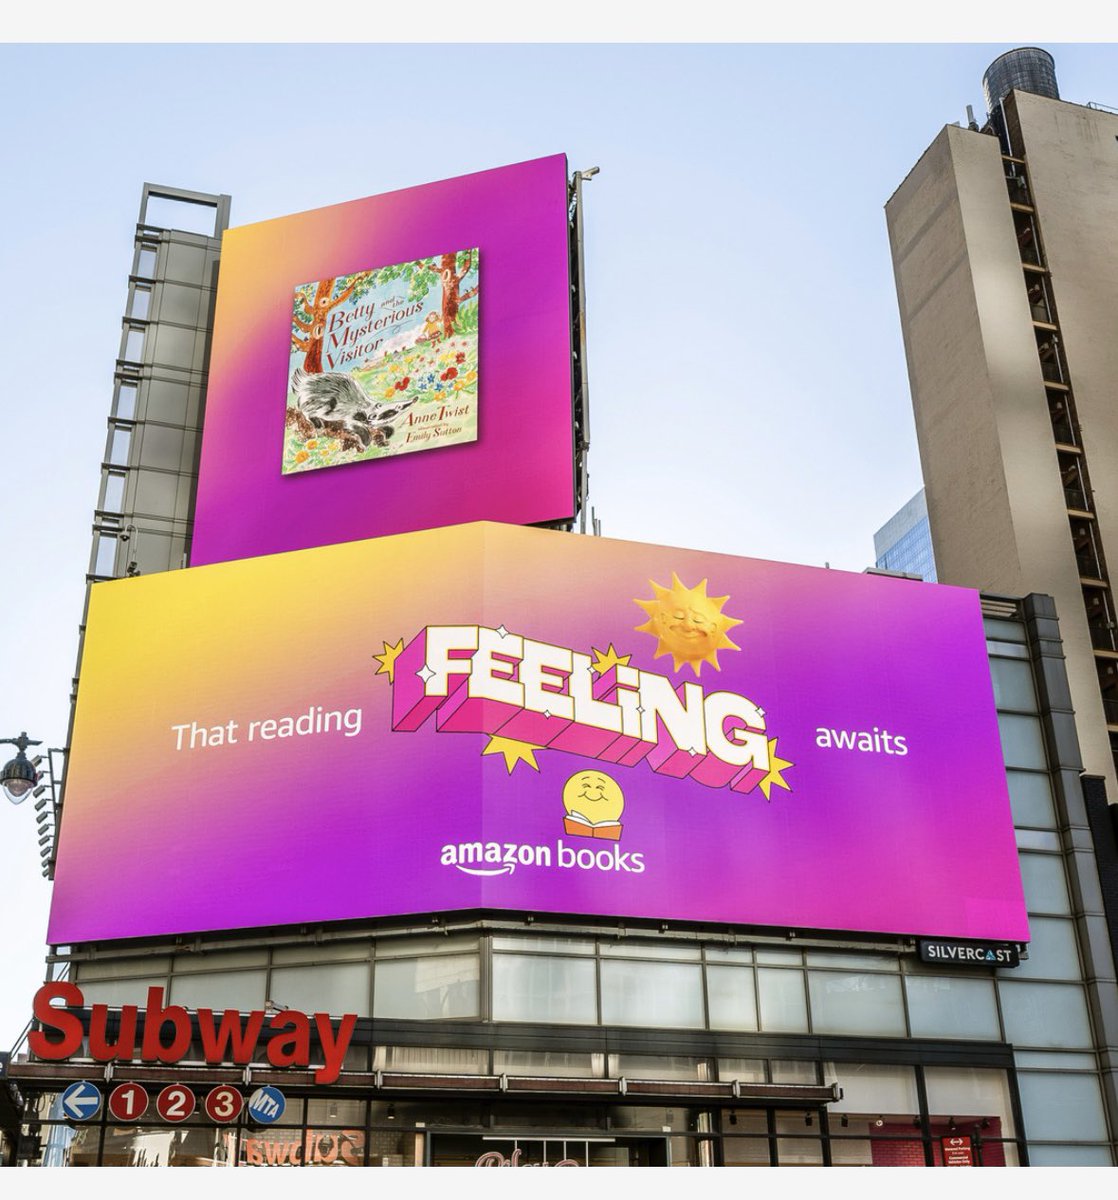 Absolutely stunned to see Betty and the Mysterious Visitor on the @amazon billboard near Penn St Station in NYC! It’s there until 29th October. If you see it let me know! It’s wild!! 🤯 #thatreadingfeeling